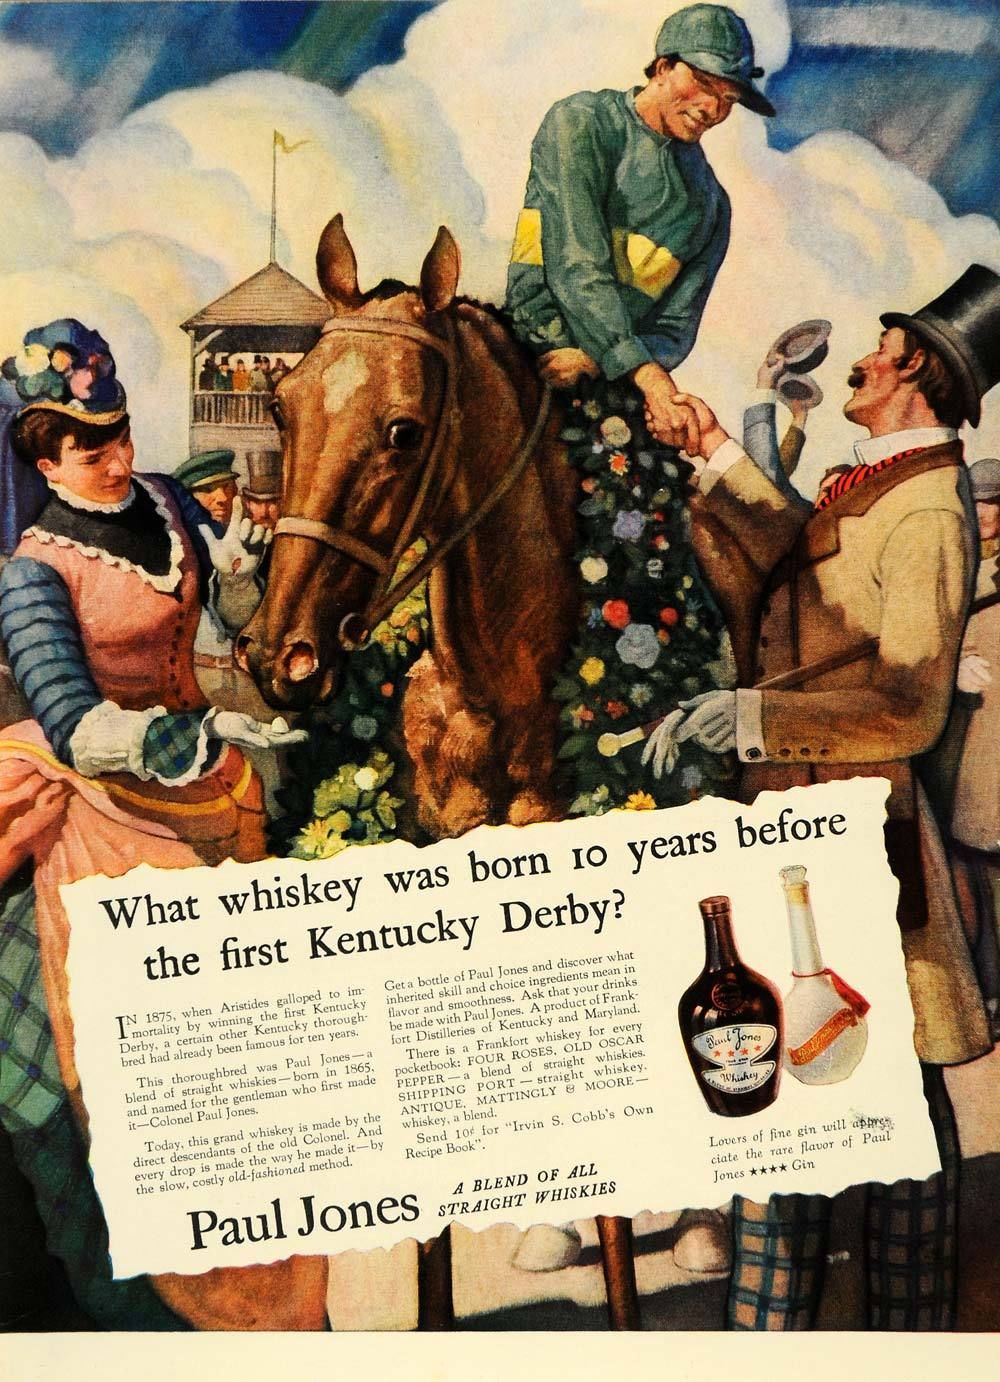 The Kentucky Derby, the Preakness & the Belmont Stakes